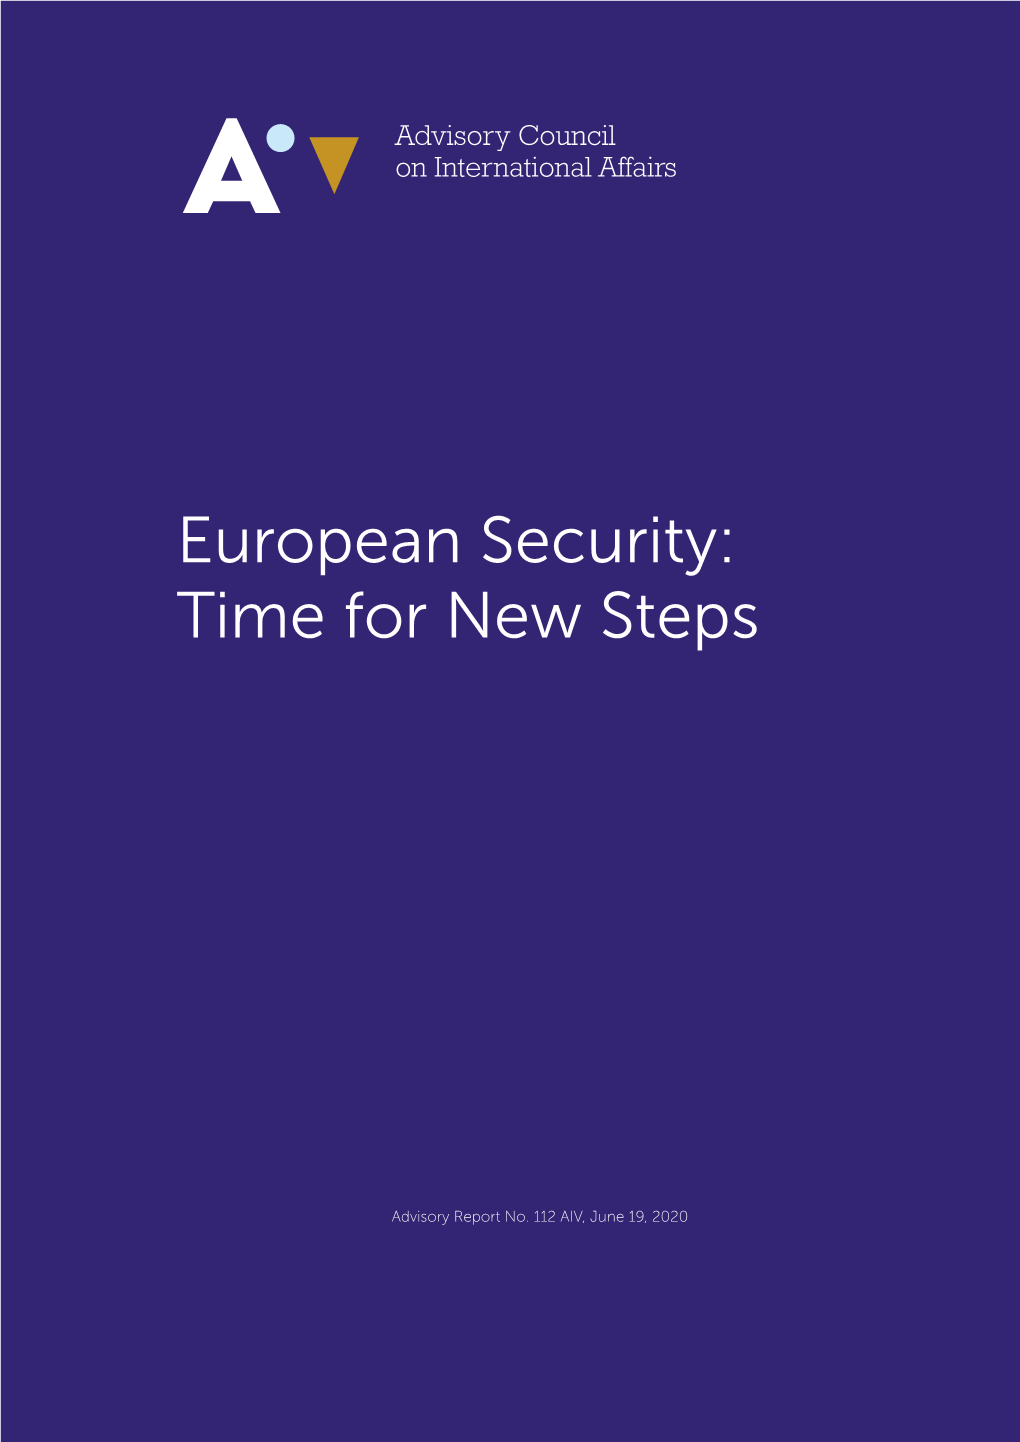 European Security: Time for New Steps